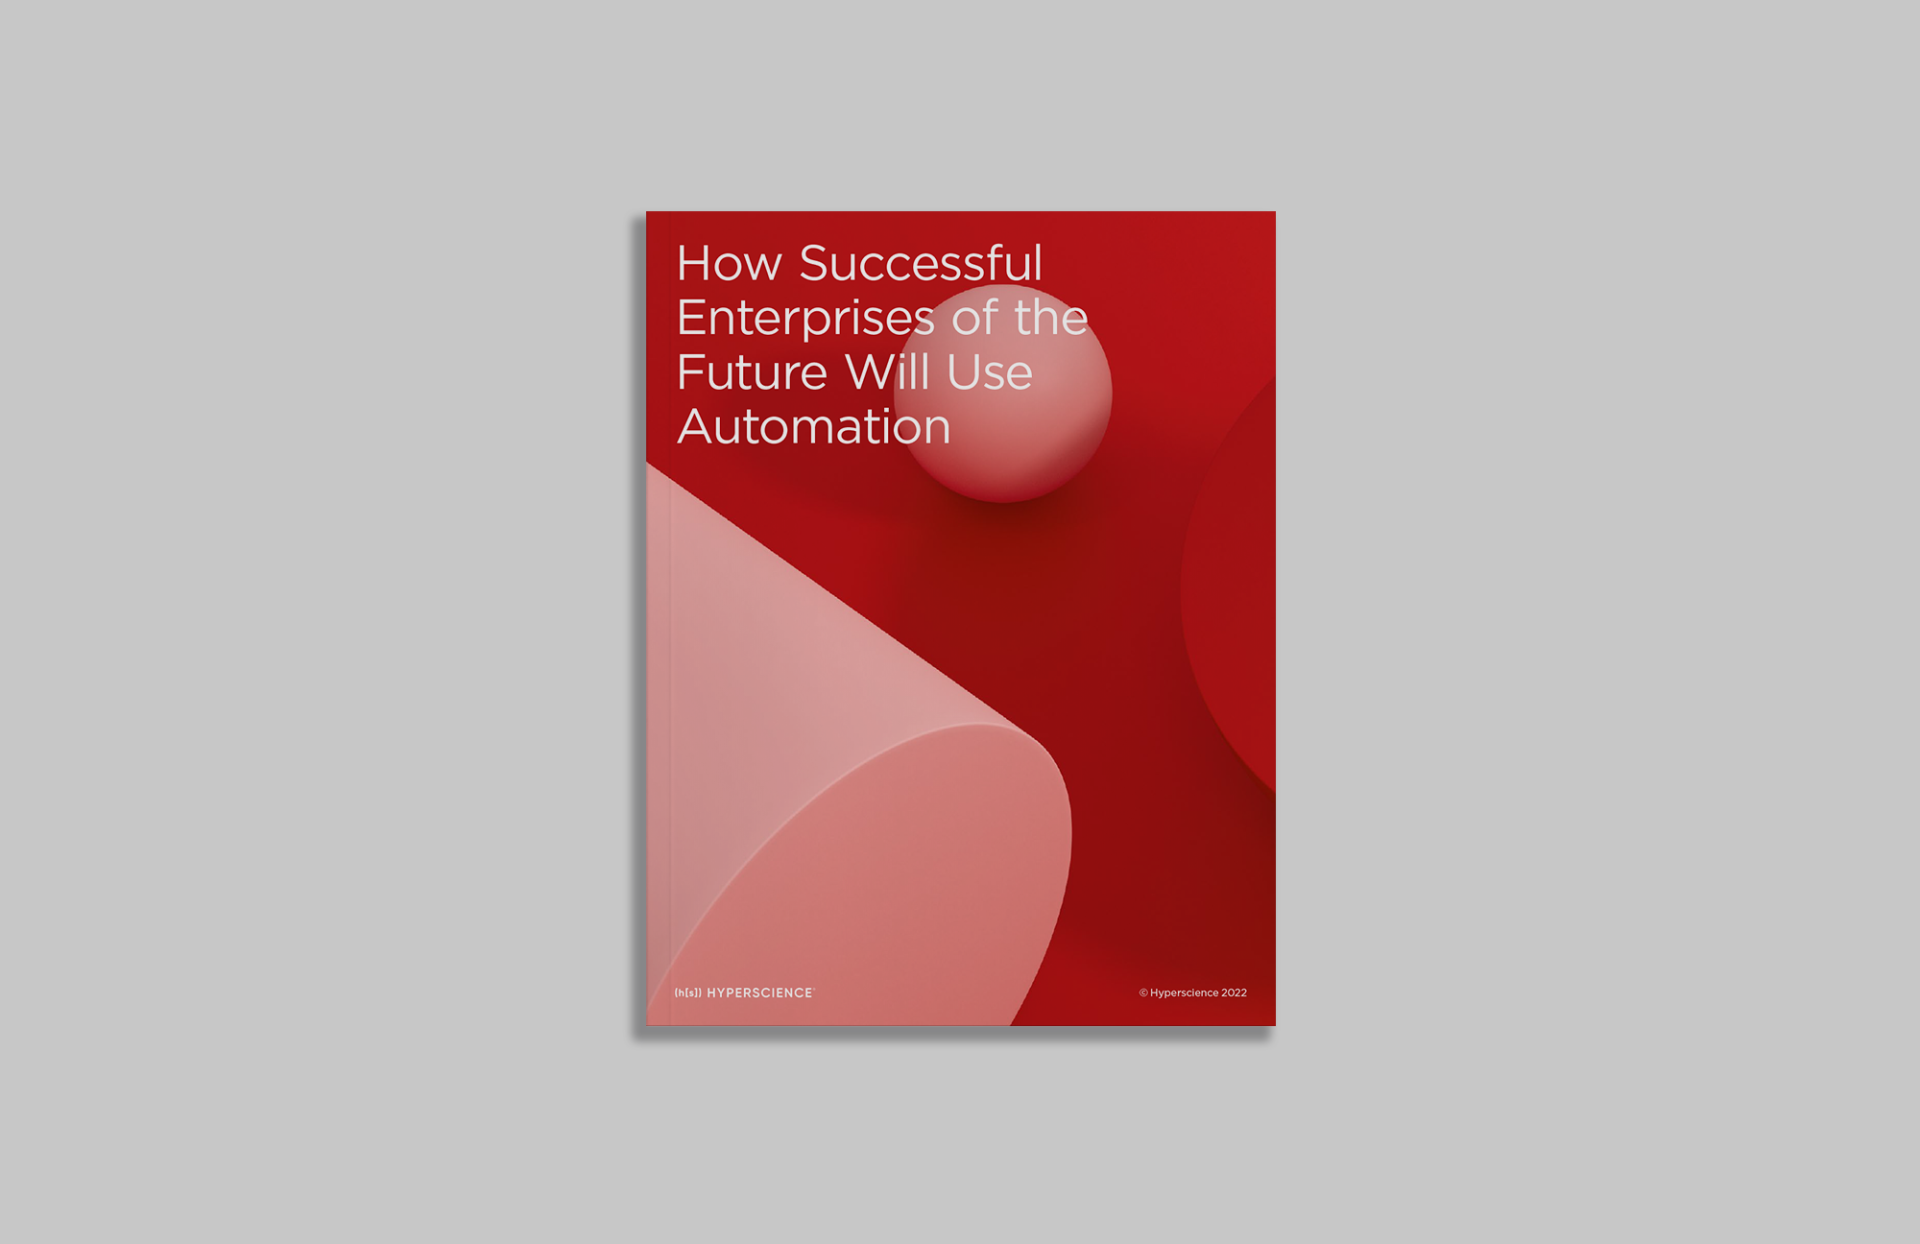 How Successful Enterprises of the Future Will Use Automation